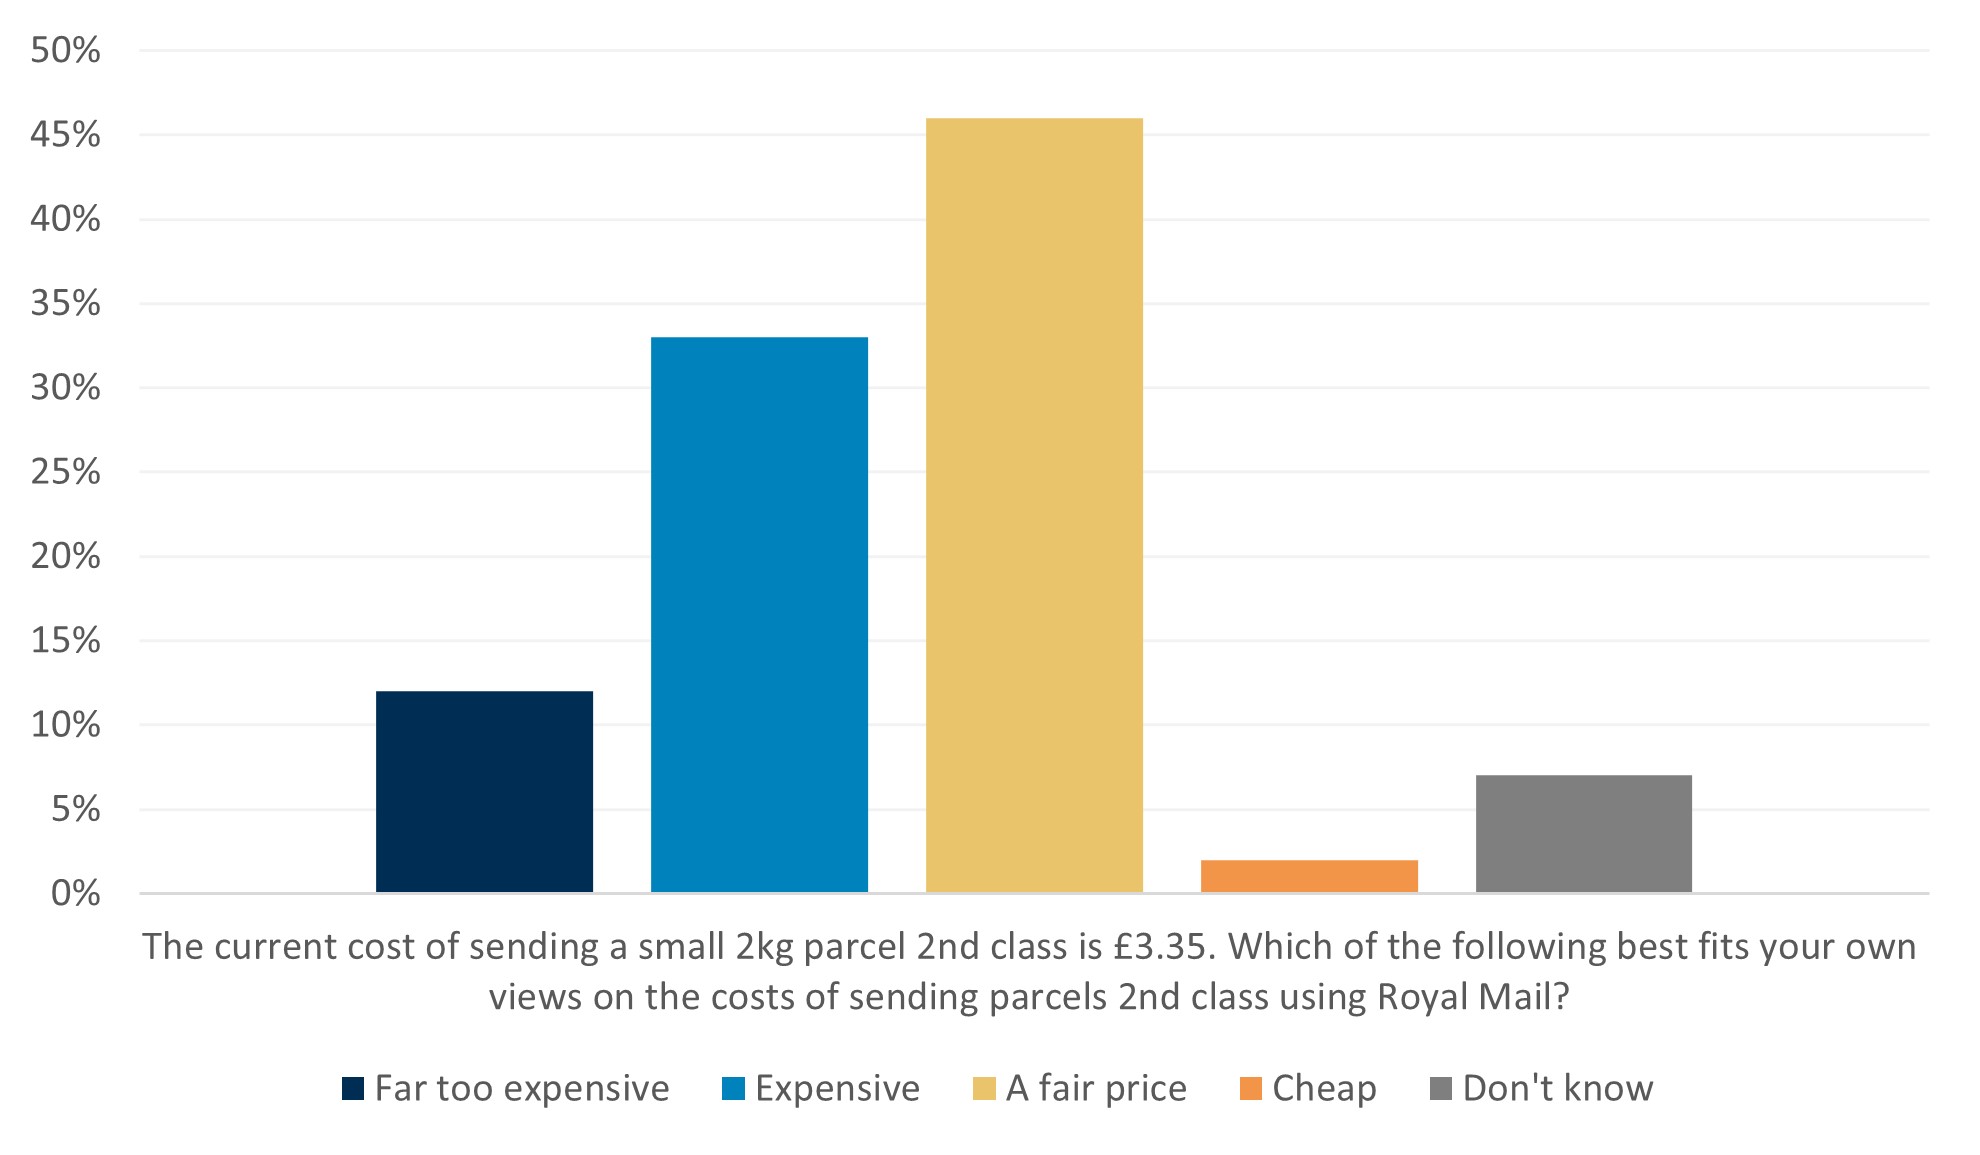 In answer to our survey question "The current cost of sending a small 2kg parcel 2nd class is £3.35. Which of the following best fits your own views on the costs of sending parcels 2nd class using Royal Mail? 12% said it was far too expensive, 33% said it was expensive, 46% said it was a fair price, 2% said it was cheap, 7% said they don't know